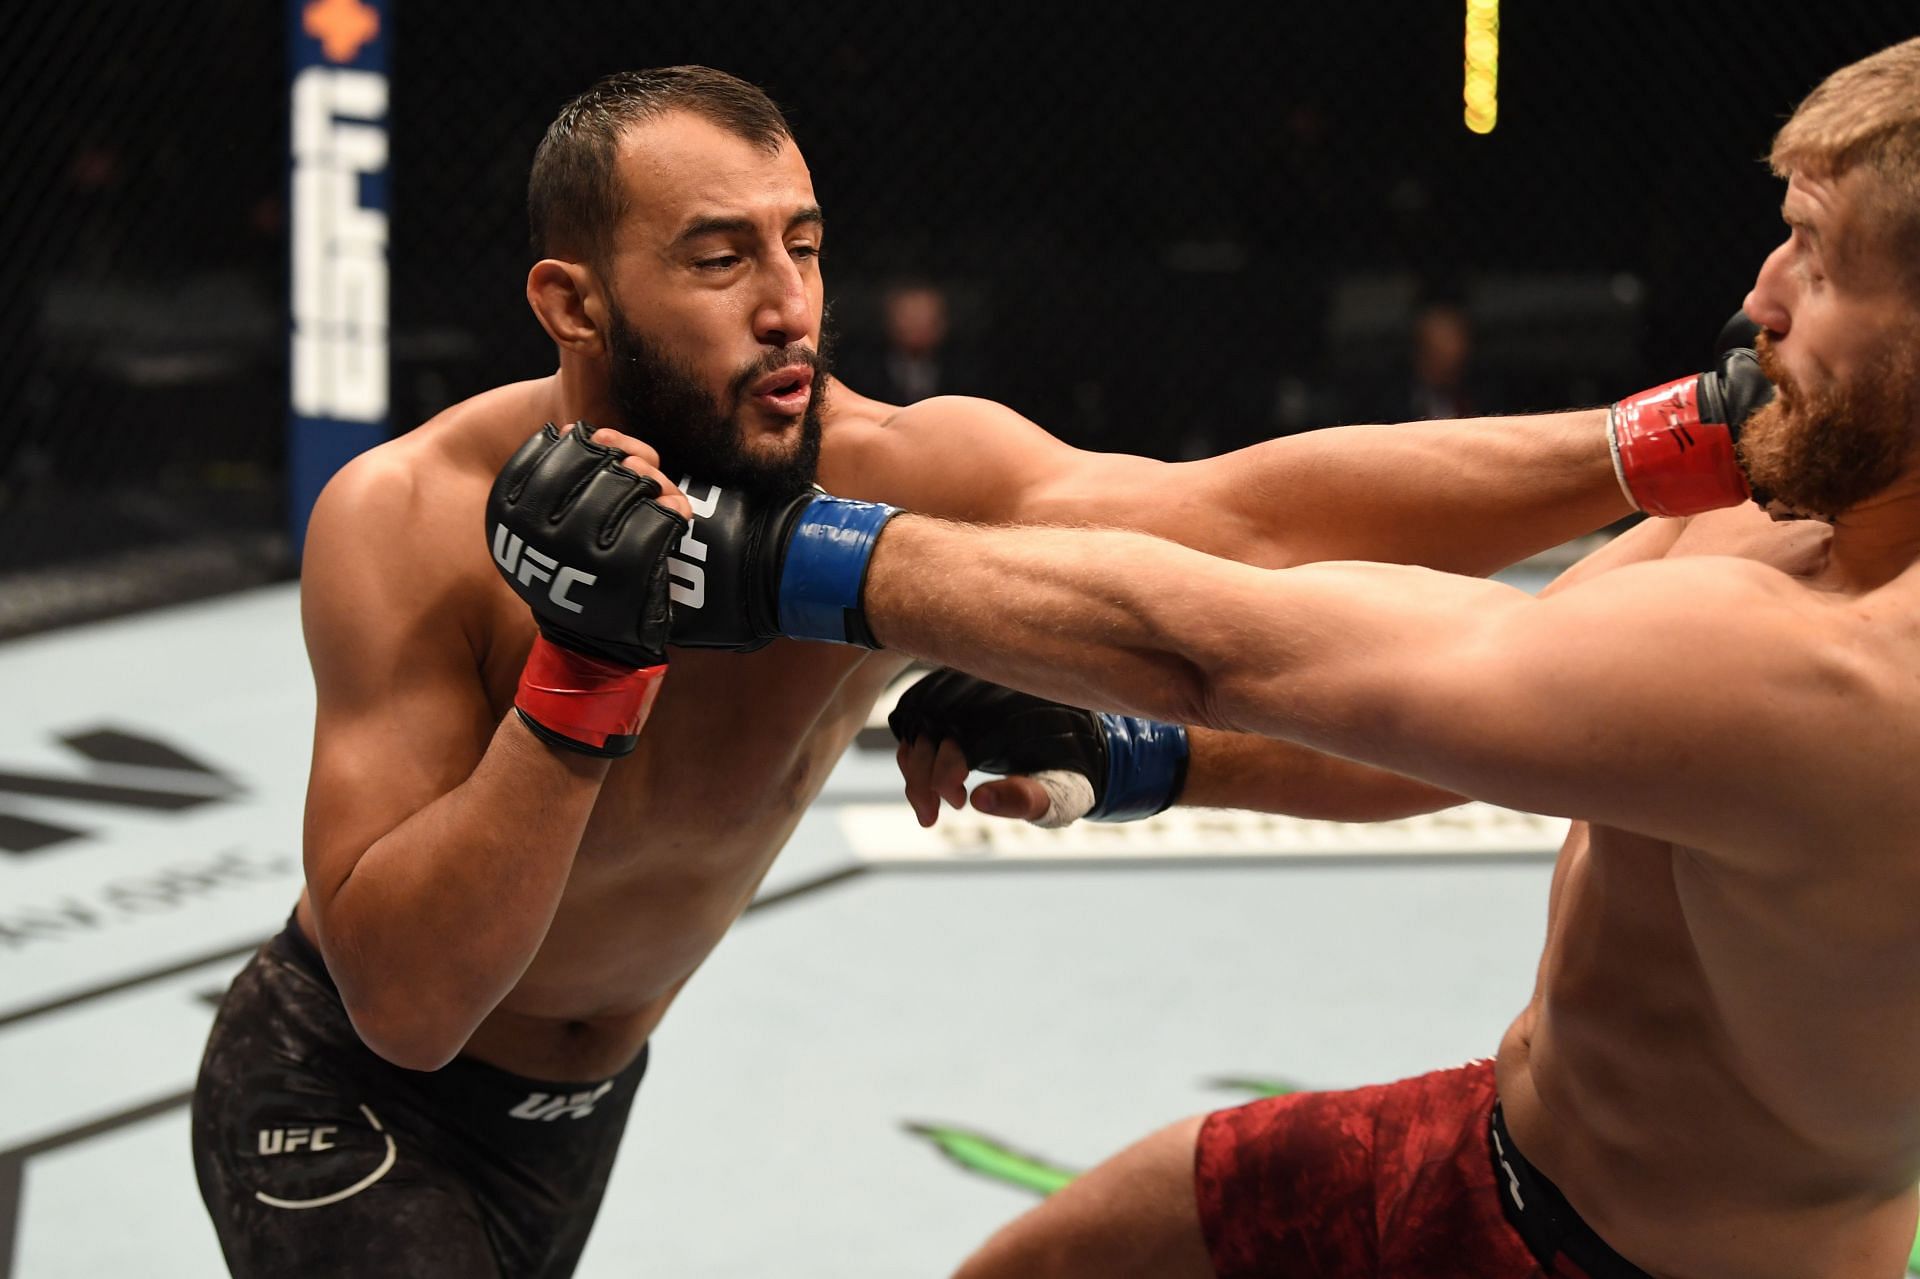 Dominick Reyes is likely to be recuperating from his most recent knockout losses, explaining his absence